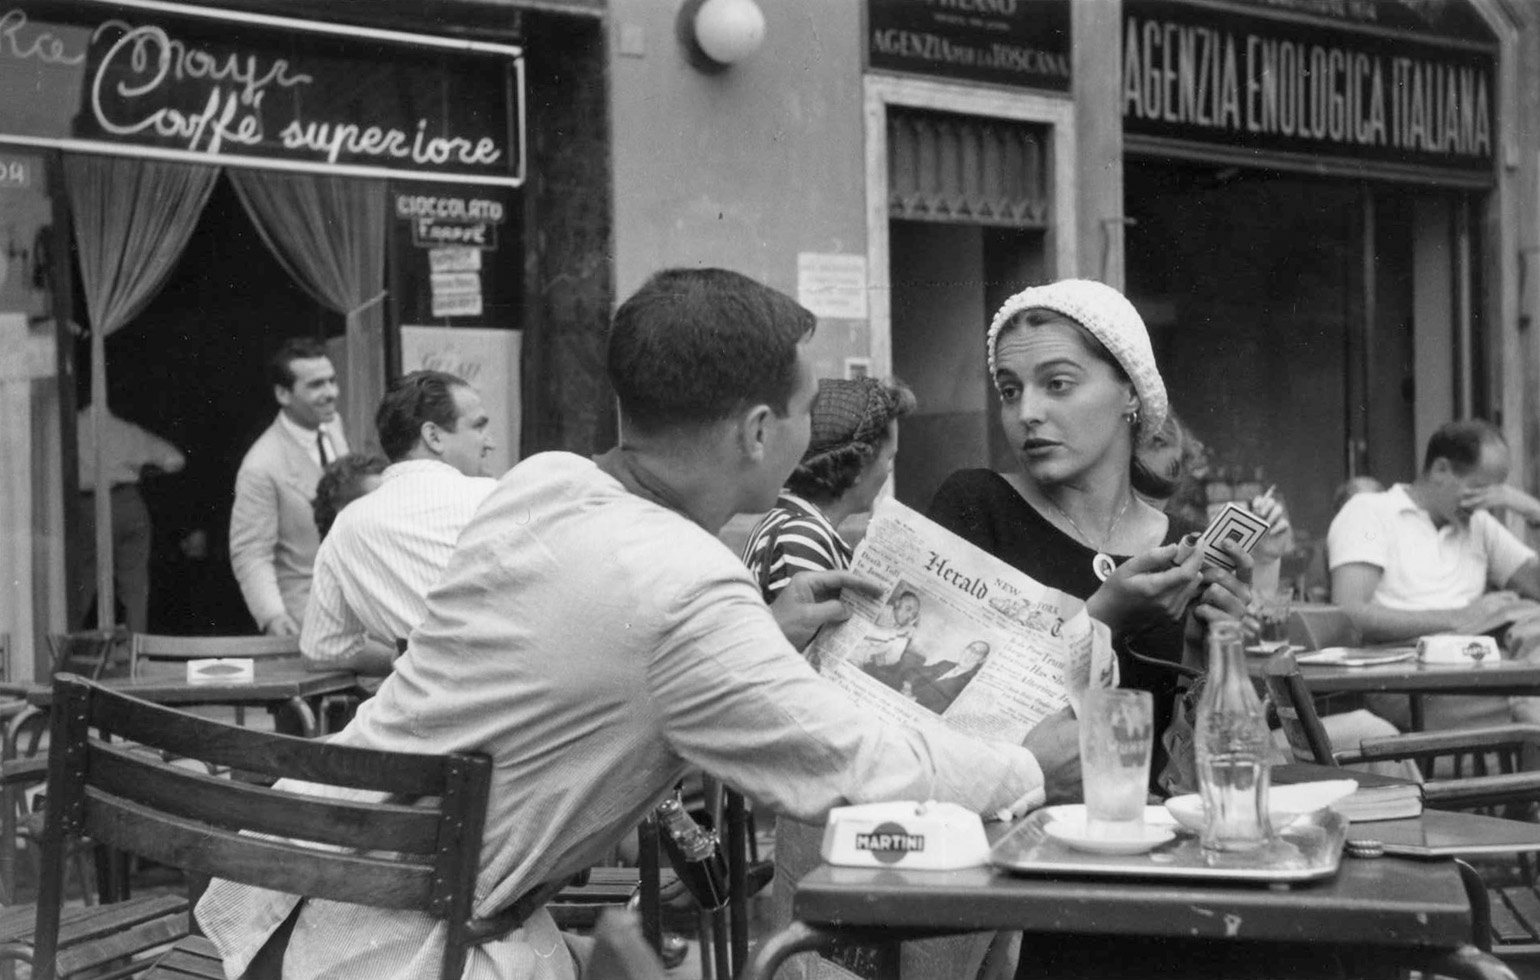 Jinx Flirting

"My mother, Ruth Orkin, had many loves. Photography and travel were two of them. In 1951, Life sent her on assignment to Israel. From there she went to Italy, and it was in Florence that she met Jinx Allen (now known as Ninalee Craig), a painter and fellow American."